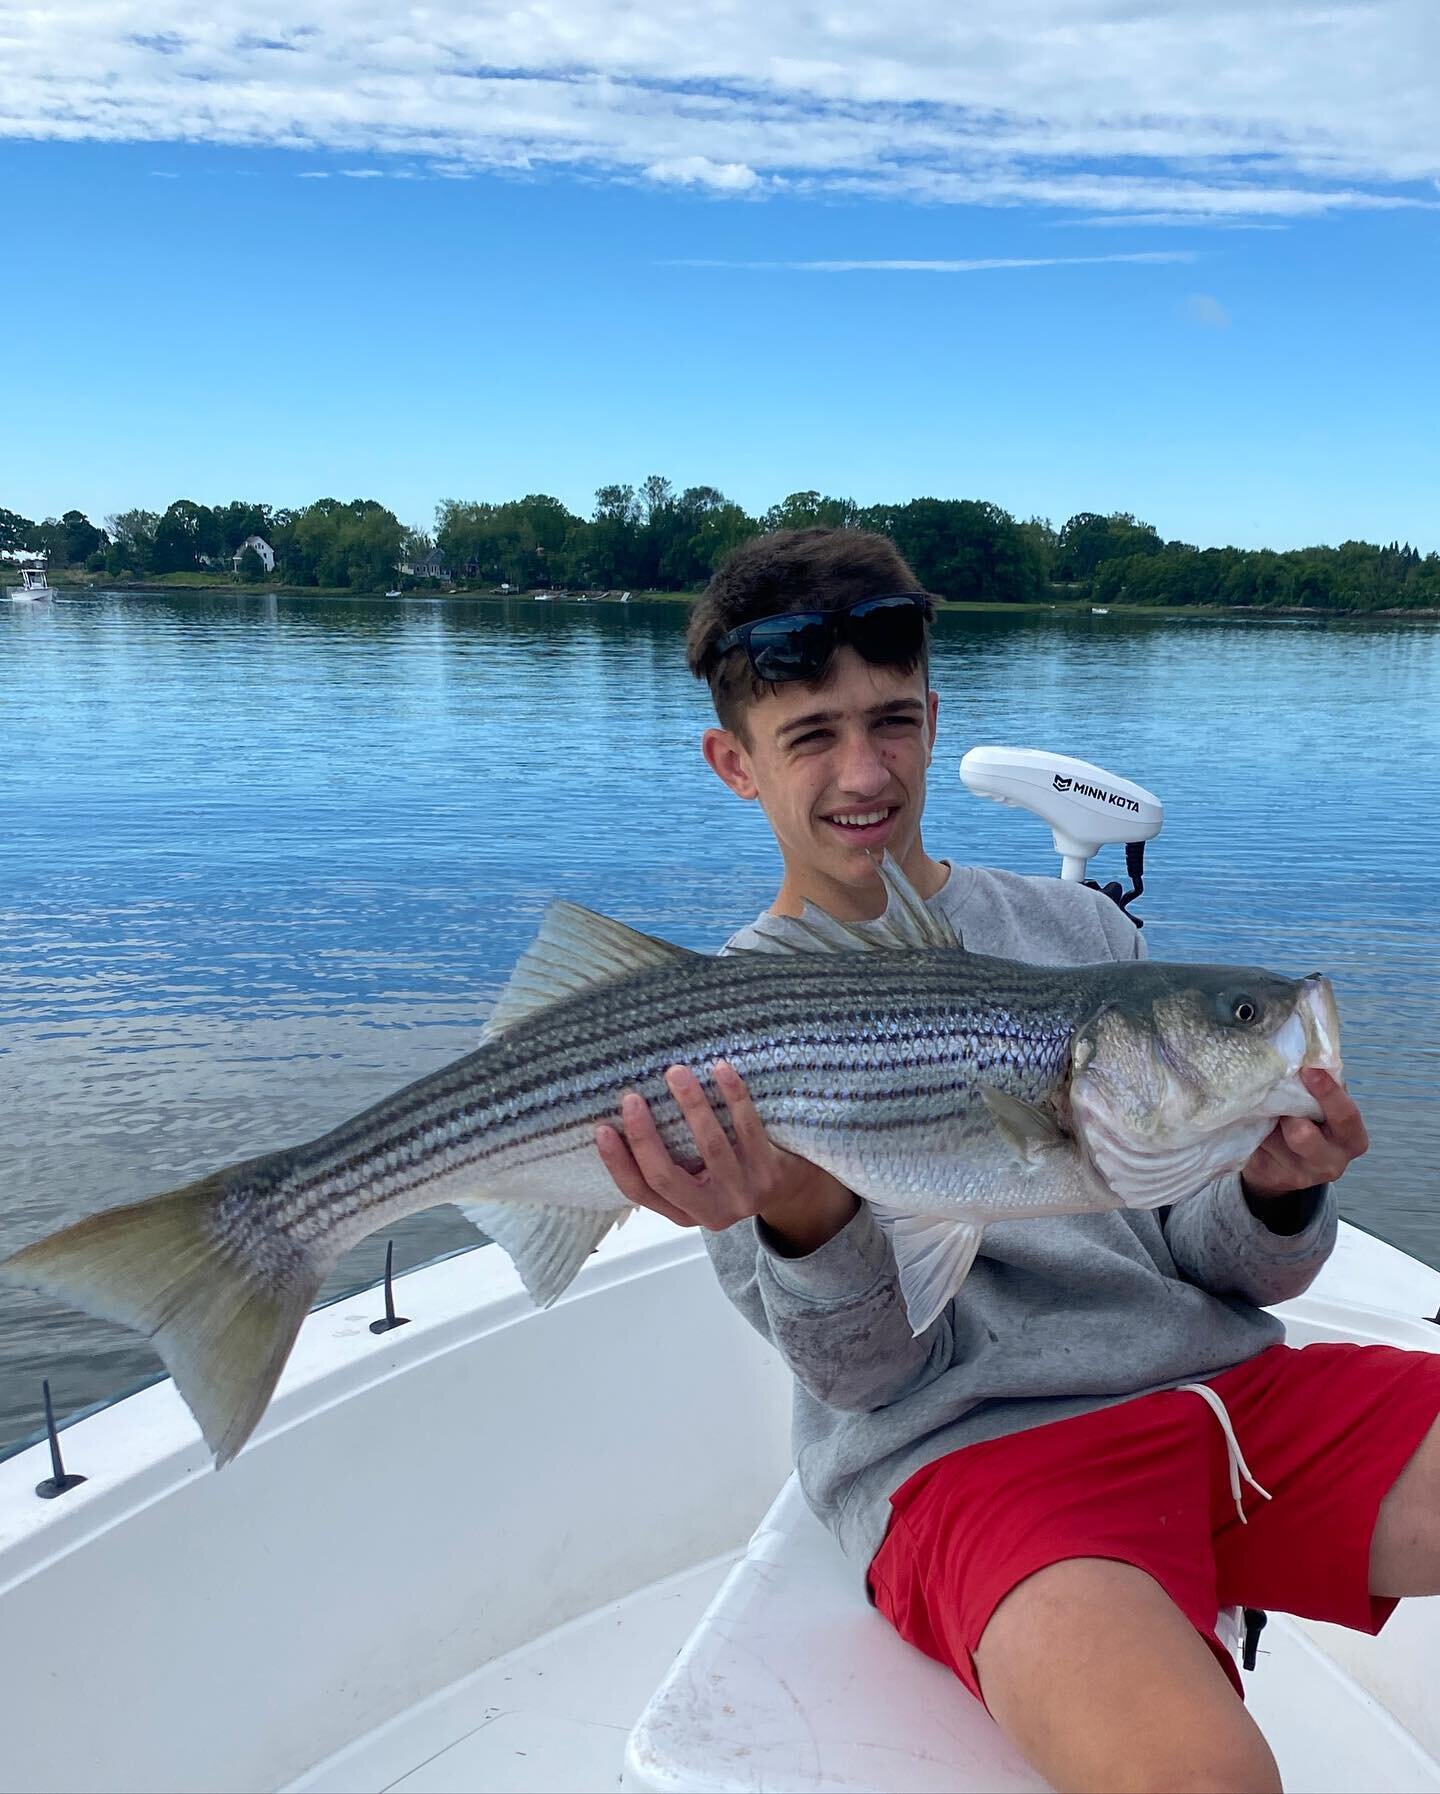 Had a great morning with these two @landry.7 @ashton.leclerc today. Fish were feisty. Water still silty - hopefully clearing soon. #stripedbass #cascobay #207 #catchandrelease #zaraspook #topwaterfishing #orvisflyfishing #coltonflyrods #rioflylines #